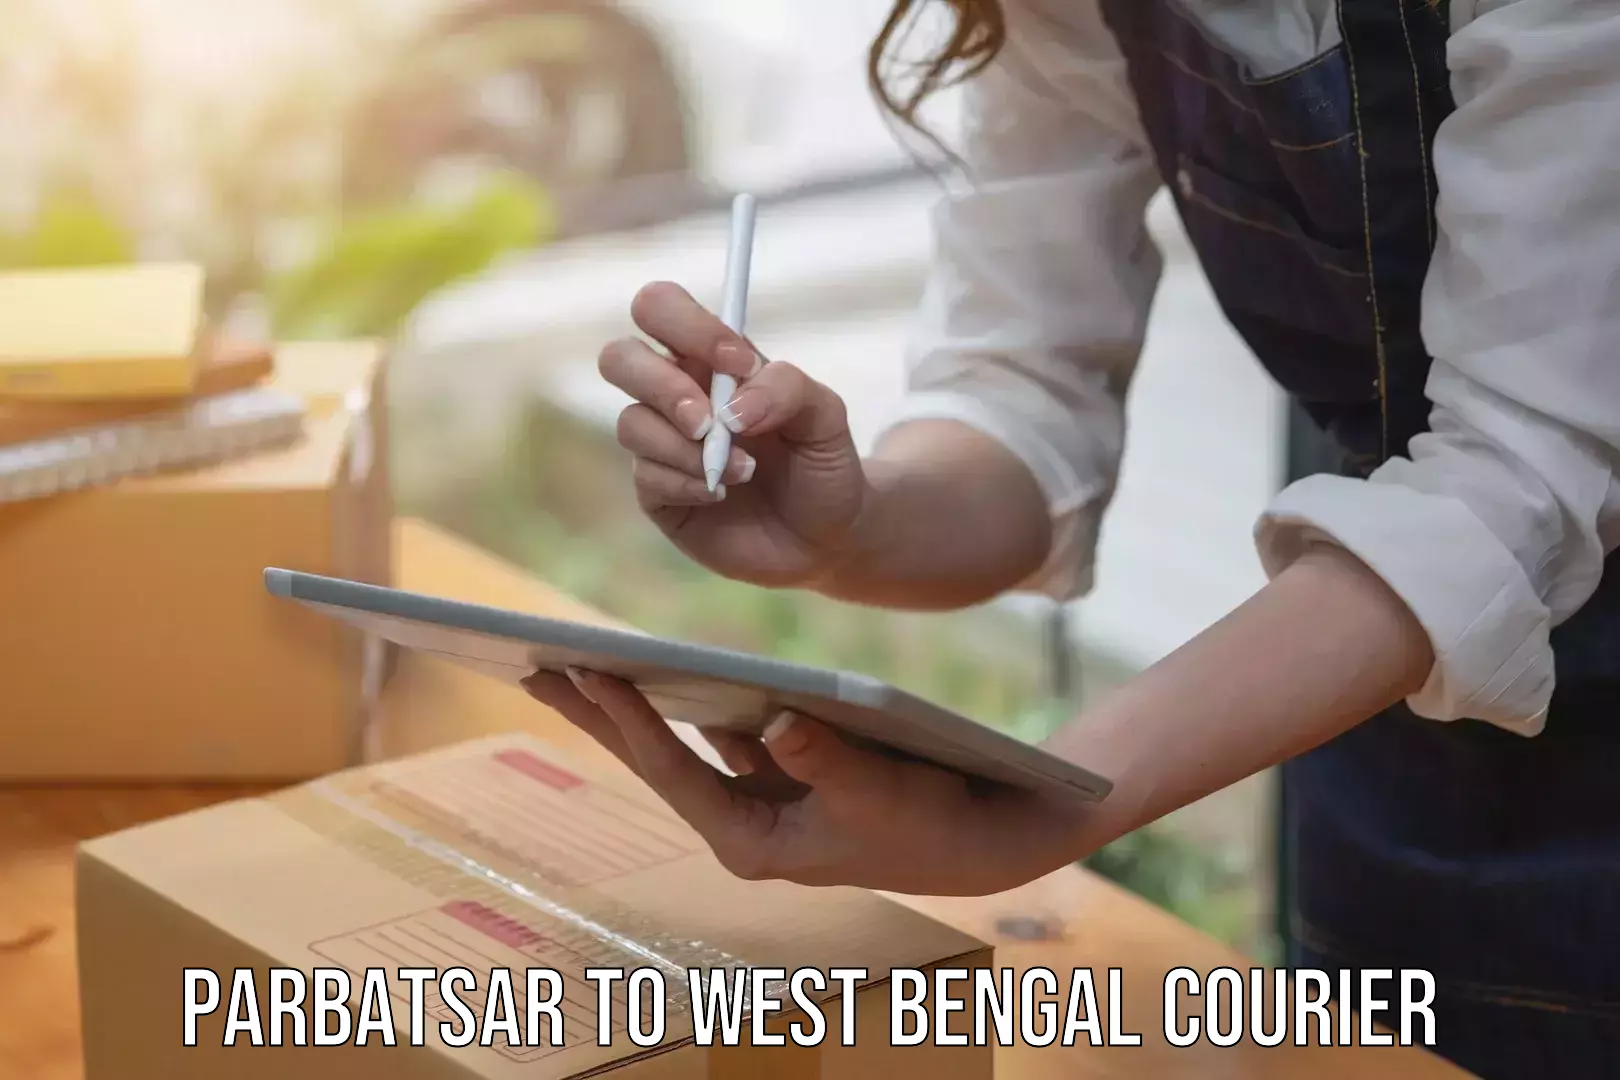 Professional courier handling Parbatsar to West Bengal